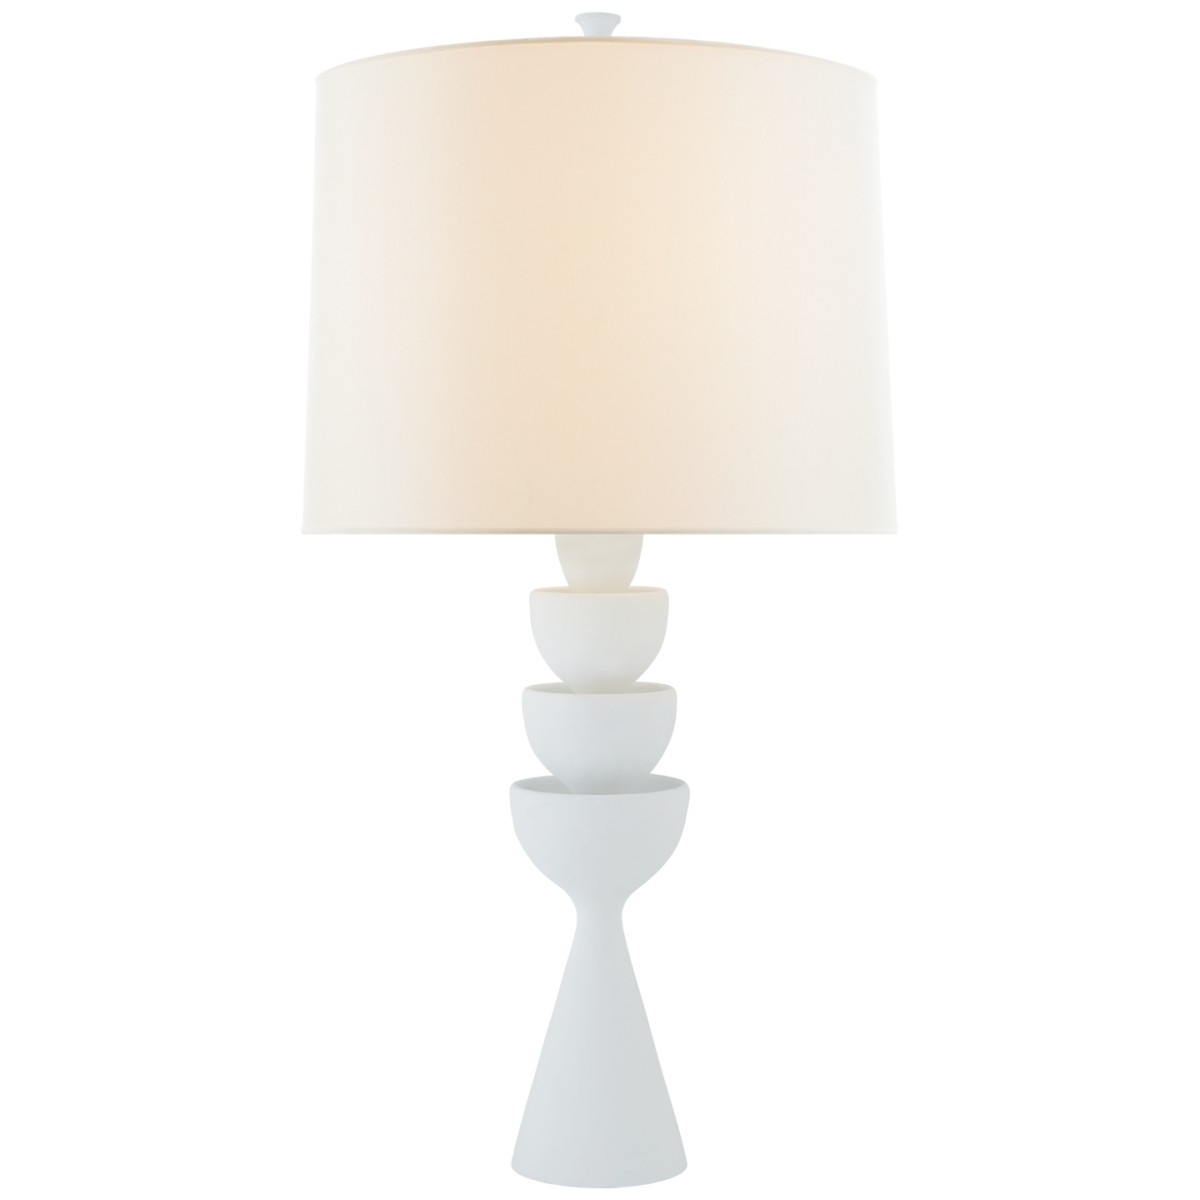 Veranna Large Table Lamp With Linen Shade